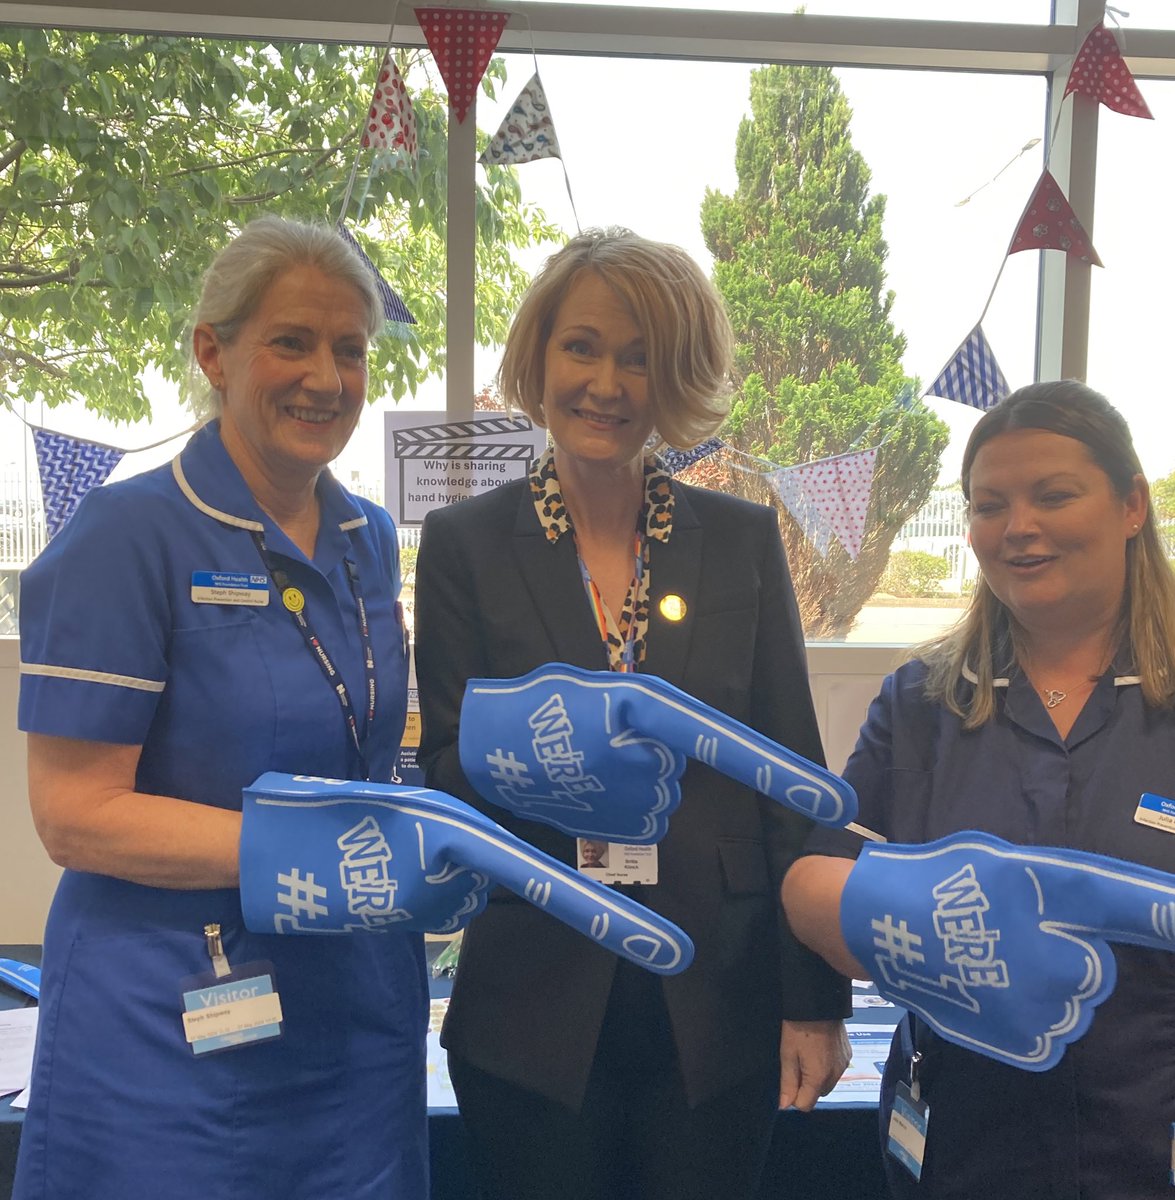 A huge thank you to all of our nurses at Oxford Health on International Nurses Day! We are grateful for your kindness, care and compassion, and the roles you play in our Trust. Photos shows our Chief Nurse Britta marking Hand Hygiene Day with colleagues #IND